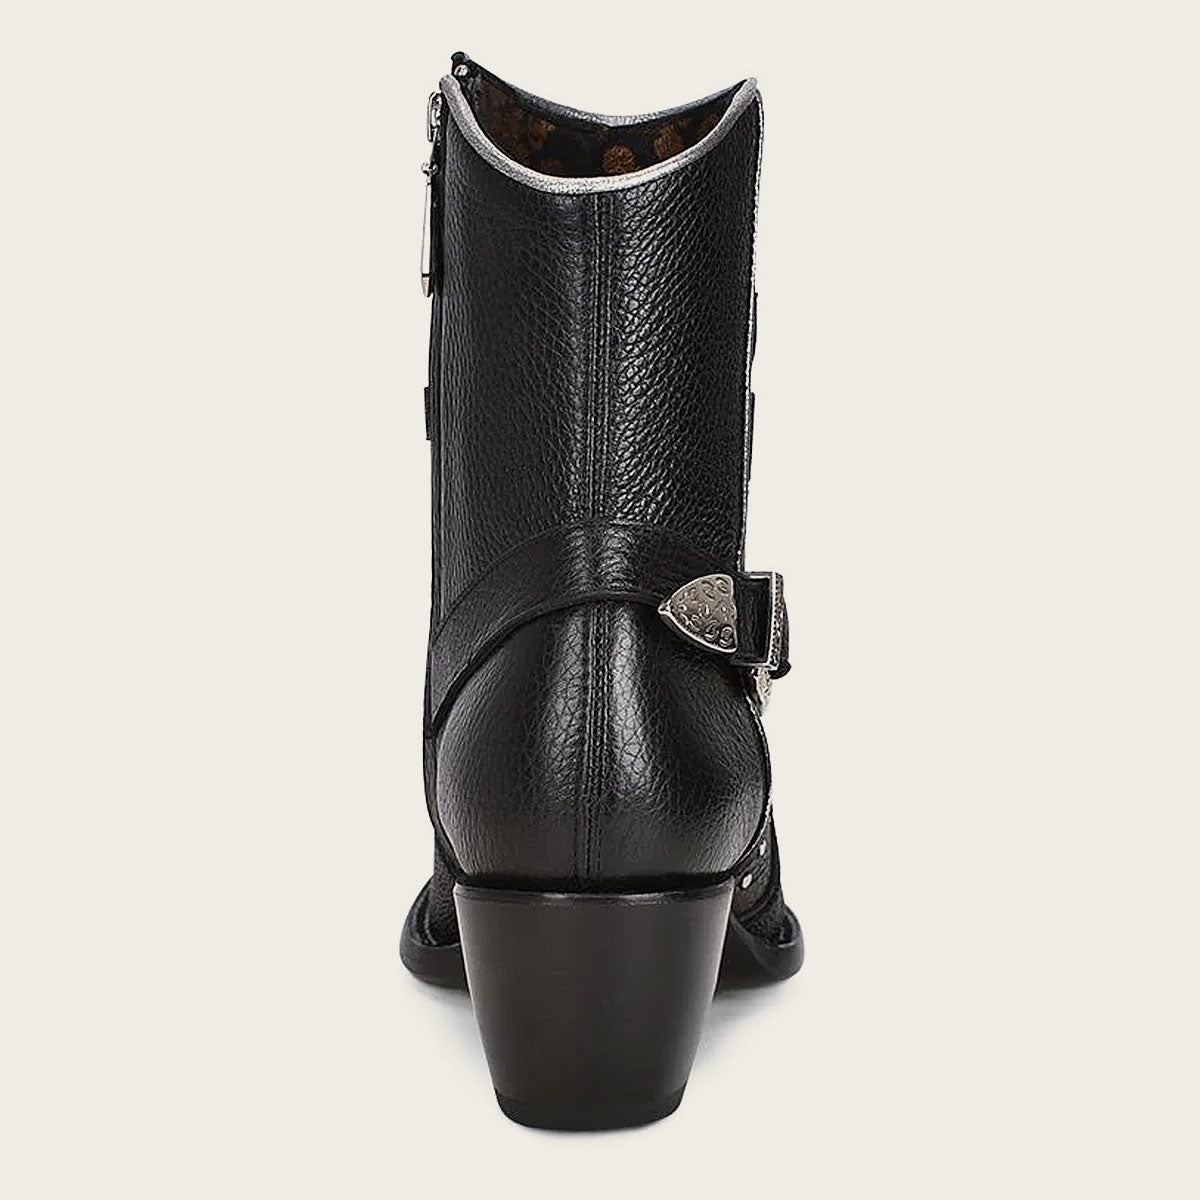 The leather strap at the back, with a decorative metal buckle, adds sophistication to these ankle boots.